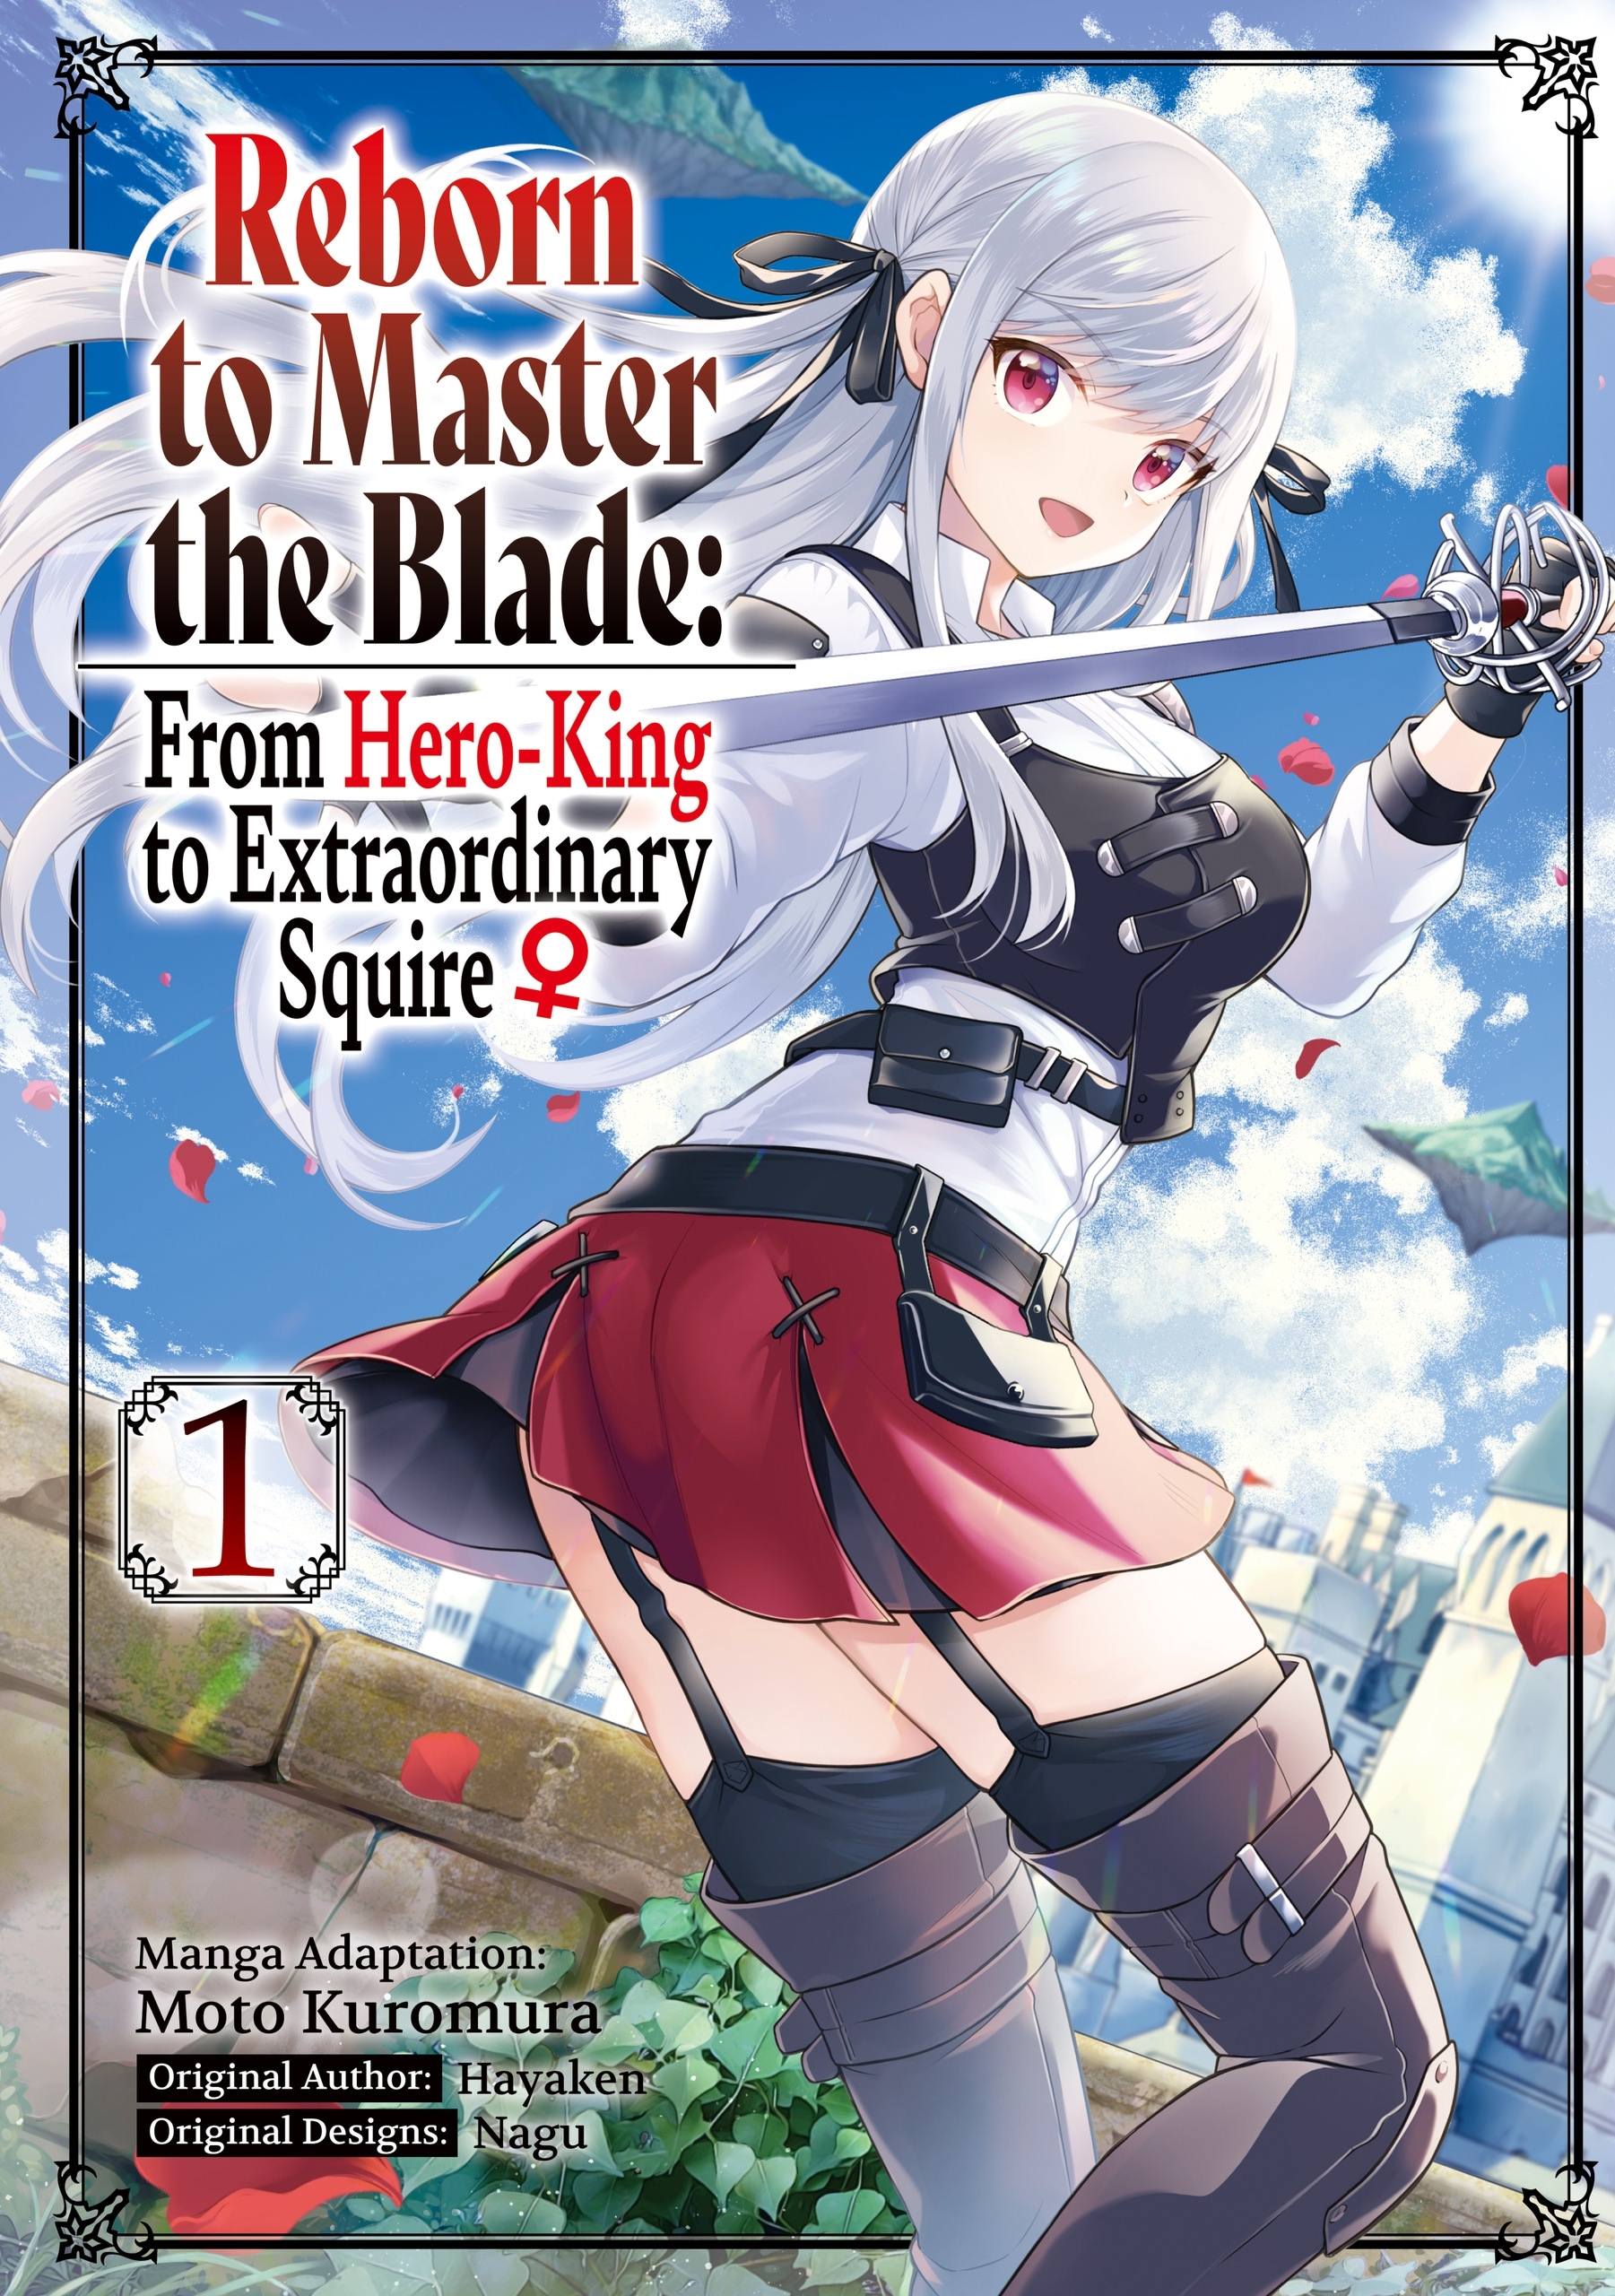 Reborn to master. Reborn to Master the Blade: from Hero-King to Extraordinary Squire. Reborn to Master the Blade. Reborn to Master the Blade: from Hero-King to Extraordinary Squire Manga.